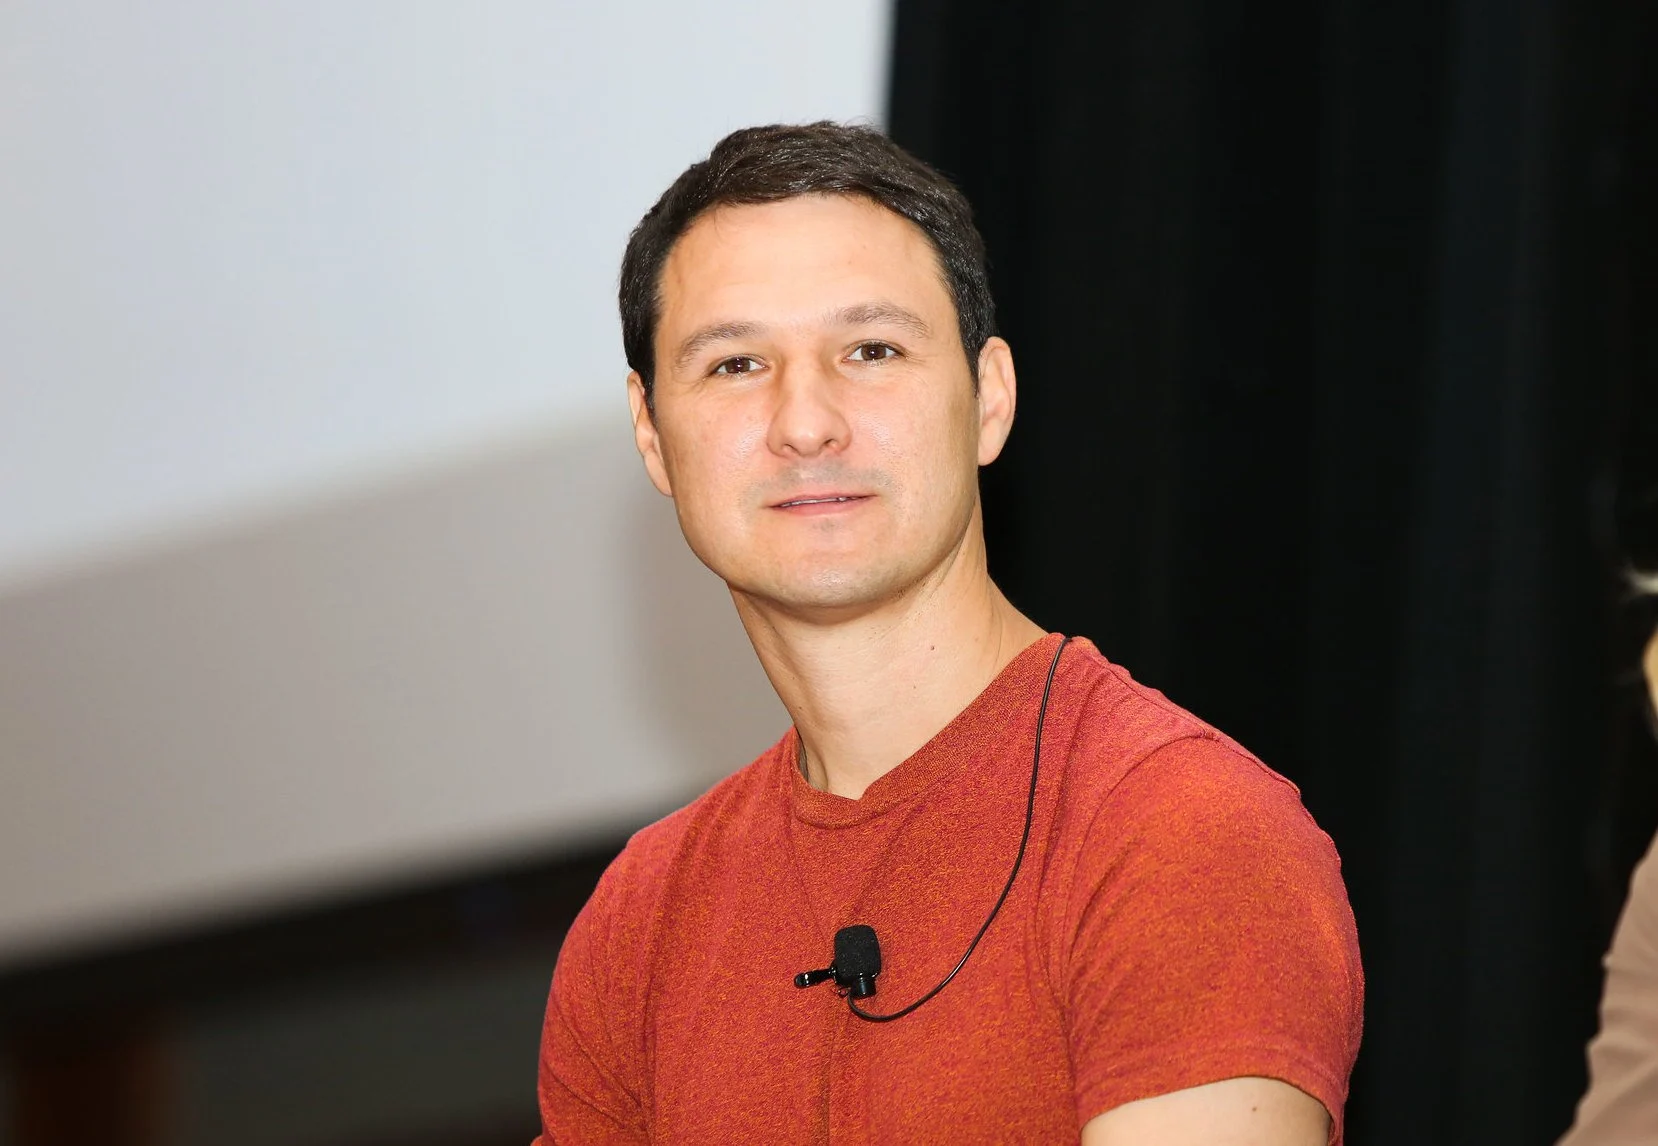 Ripple CTO Jed McCaleb’s XRP Is Going to Zero Soon